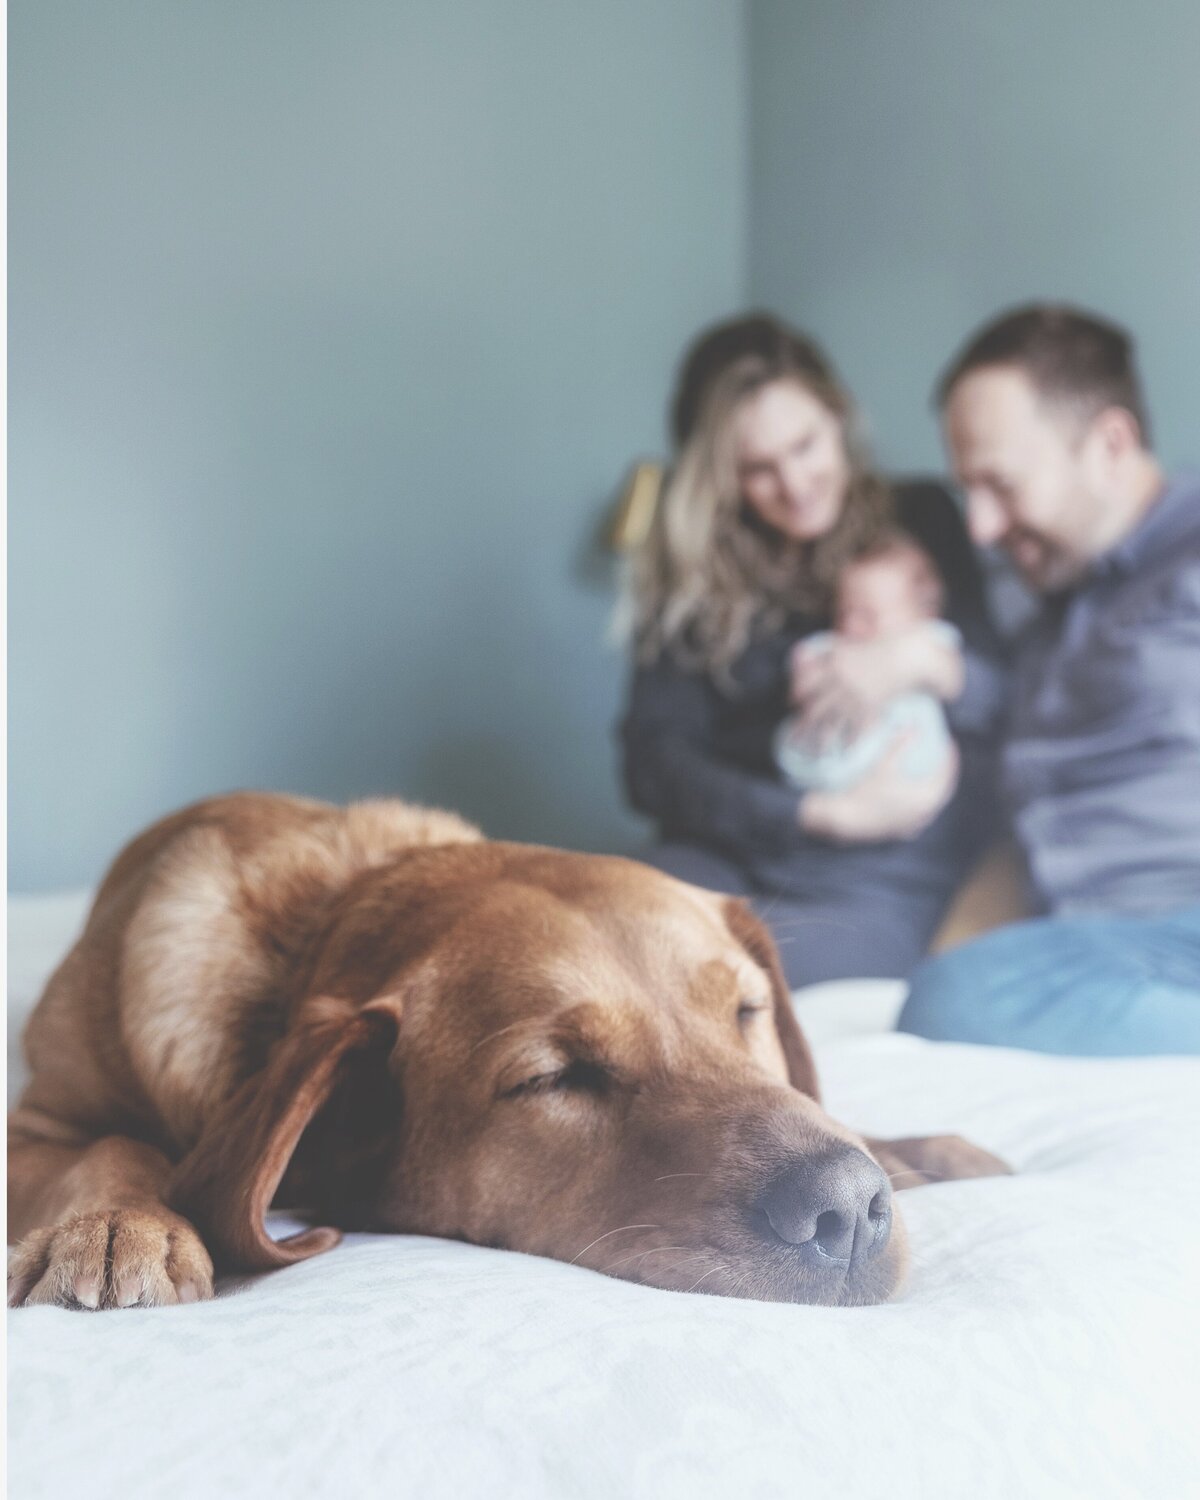 Couple hold their newborn baby in the background while their dog rests in the foreground